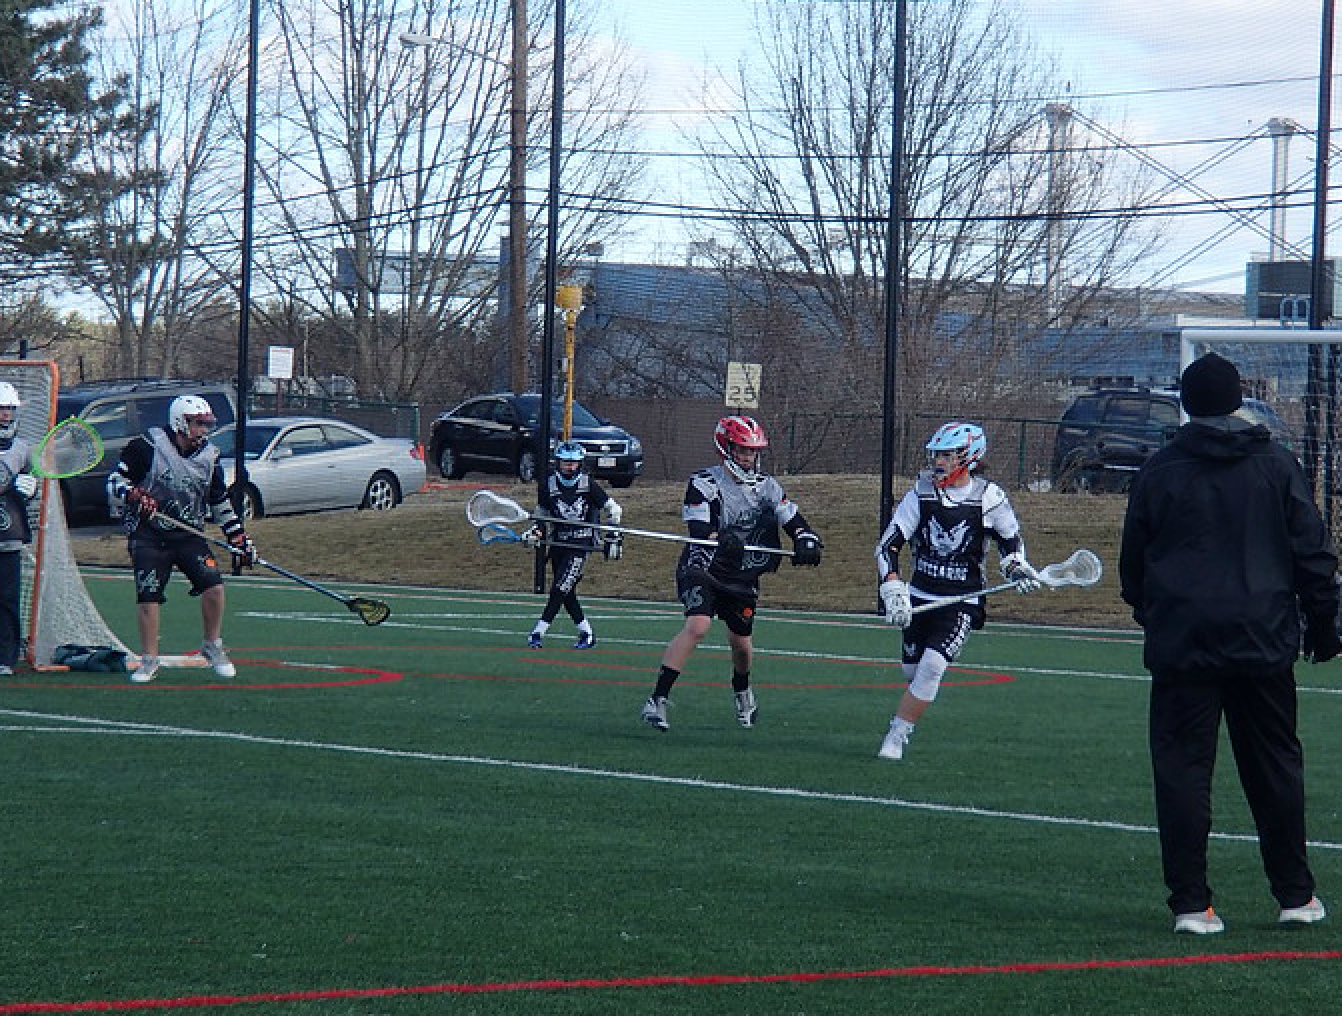 4 Leaf Lax Continues to Drive Fundraising/Registration for SFS Boston |Shootout for Soldiers